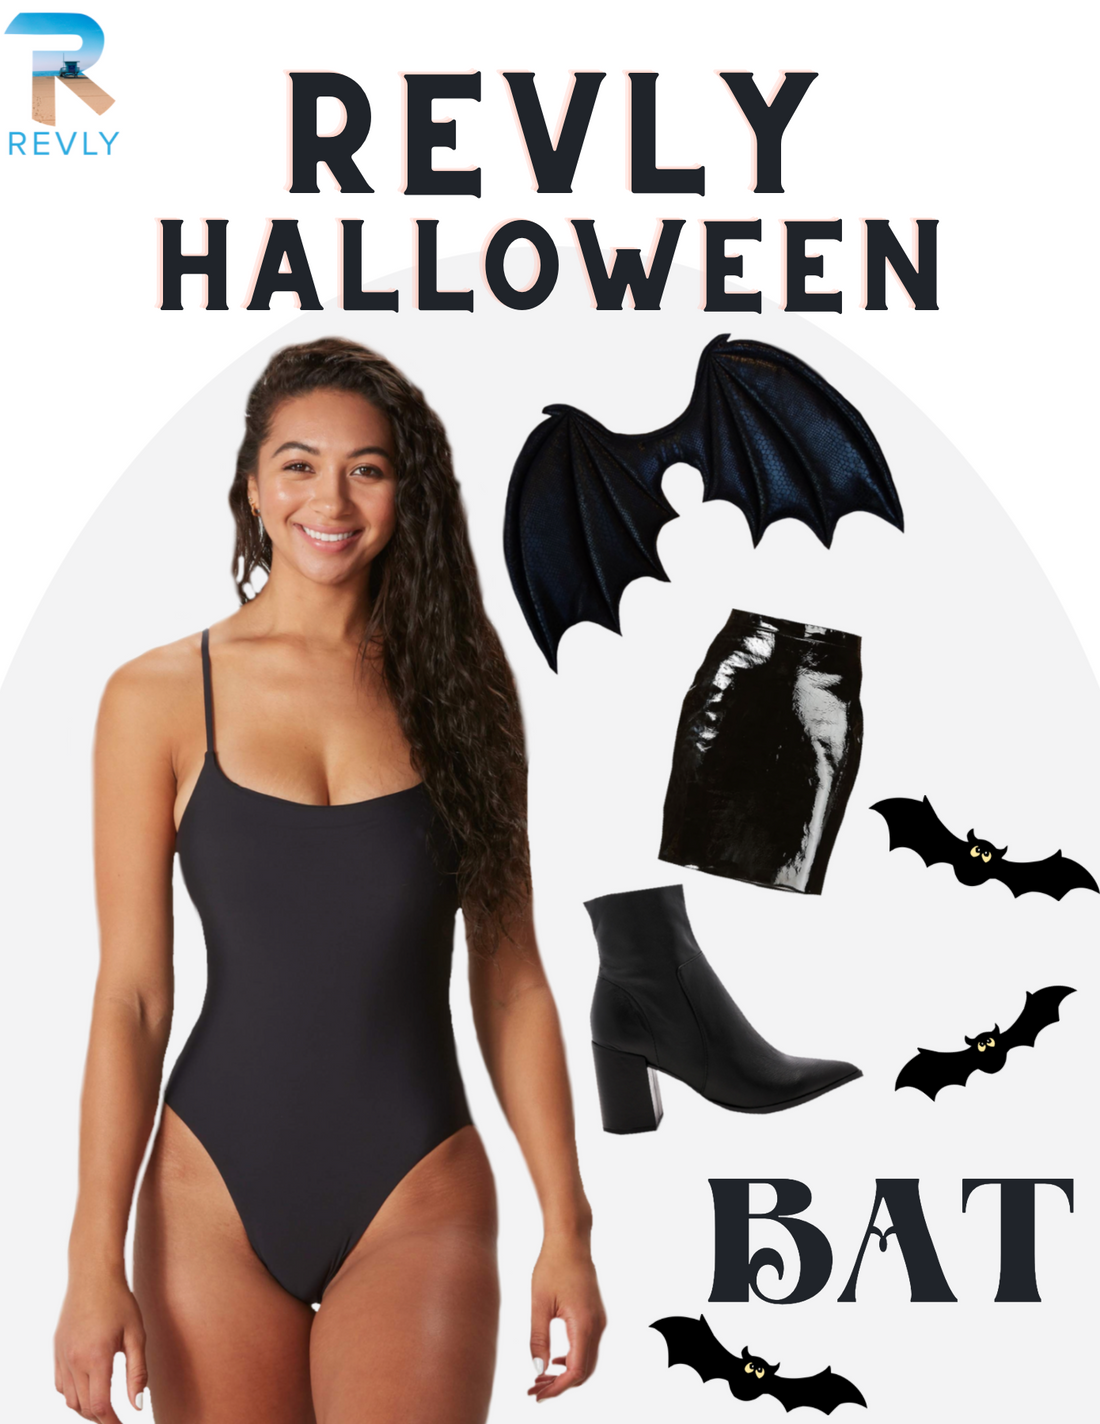 How to Turn Your Favorite REVLY Suit into a Halloween Costume